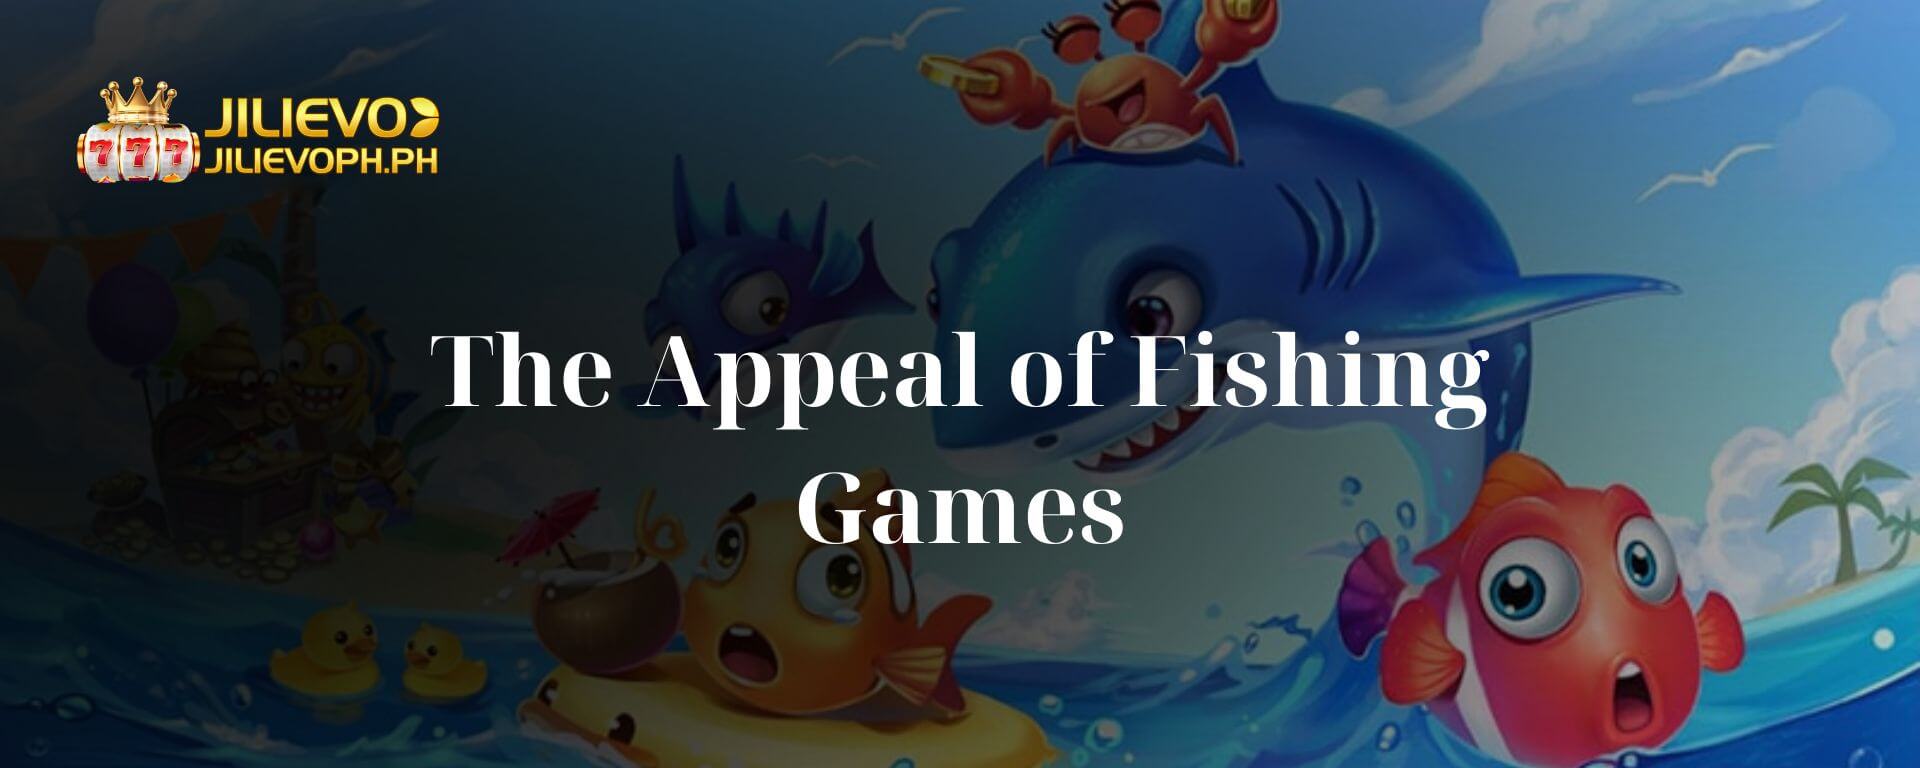 The Appeal of Fishing Games